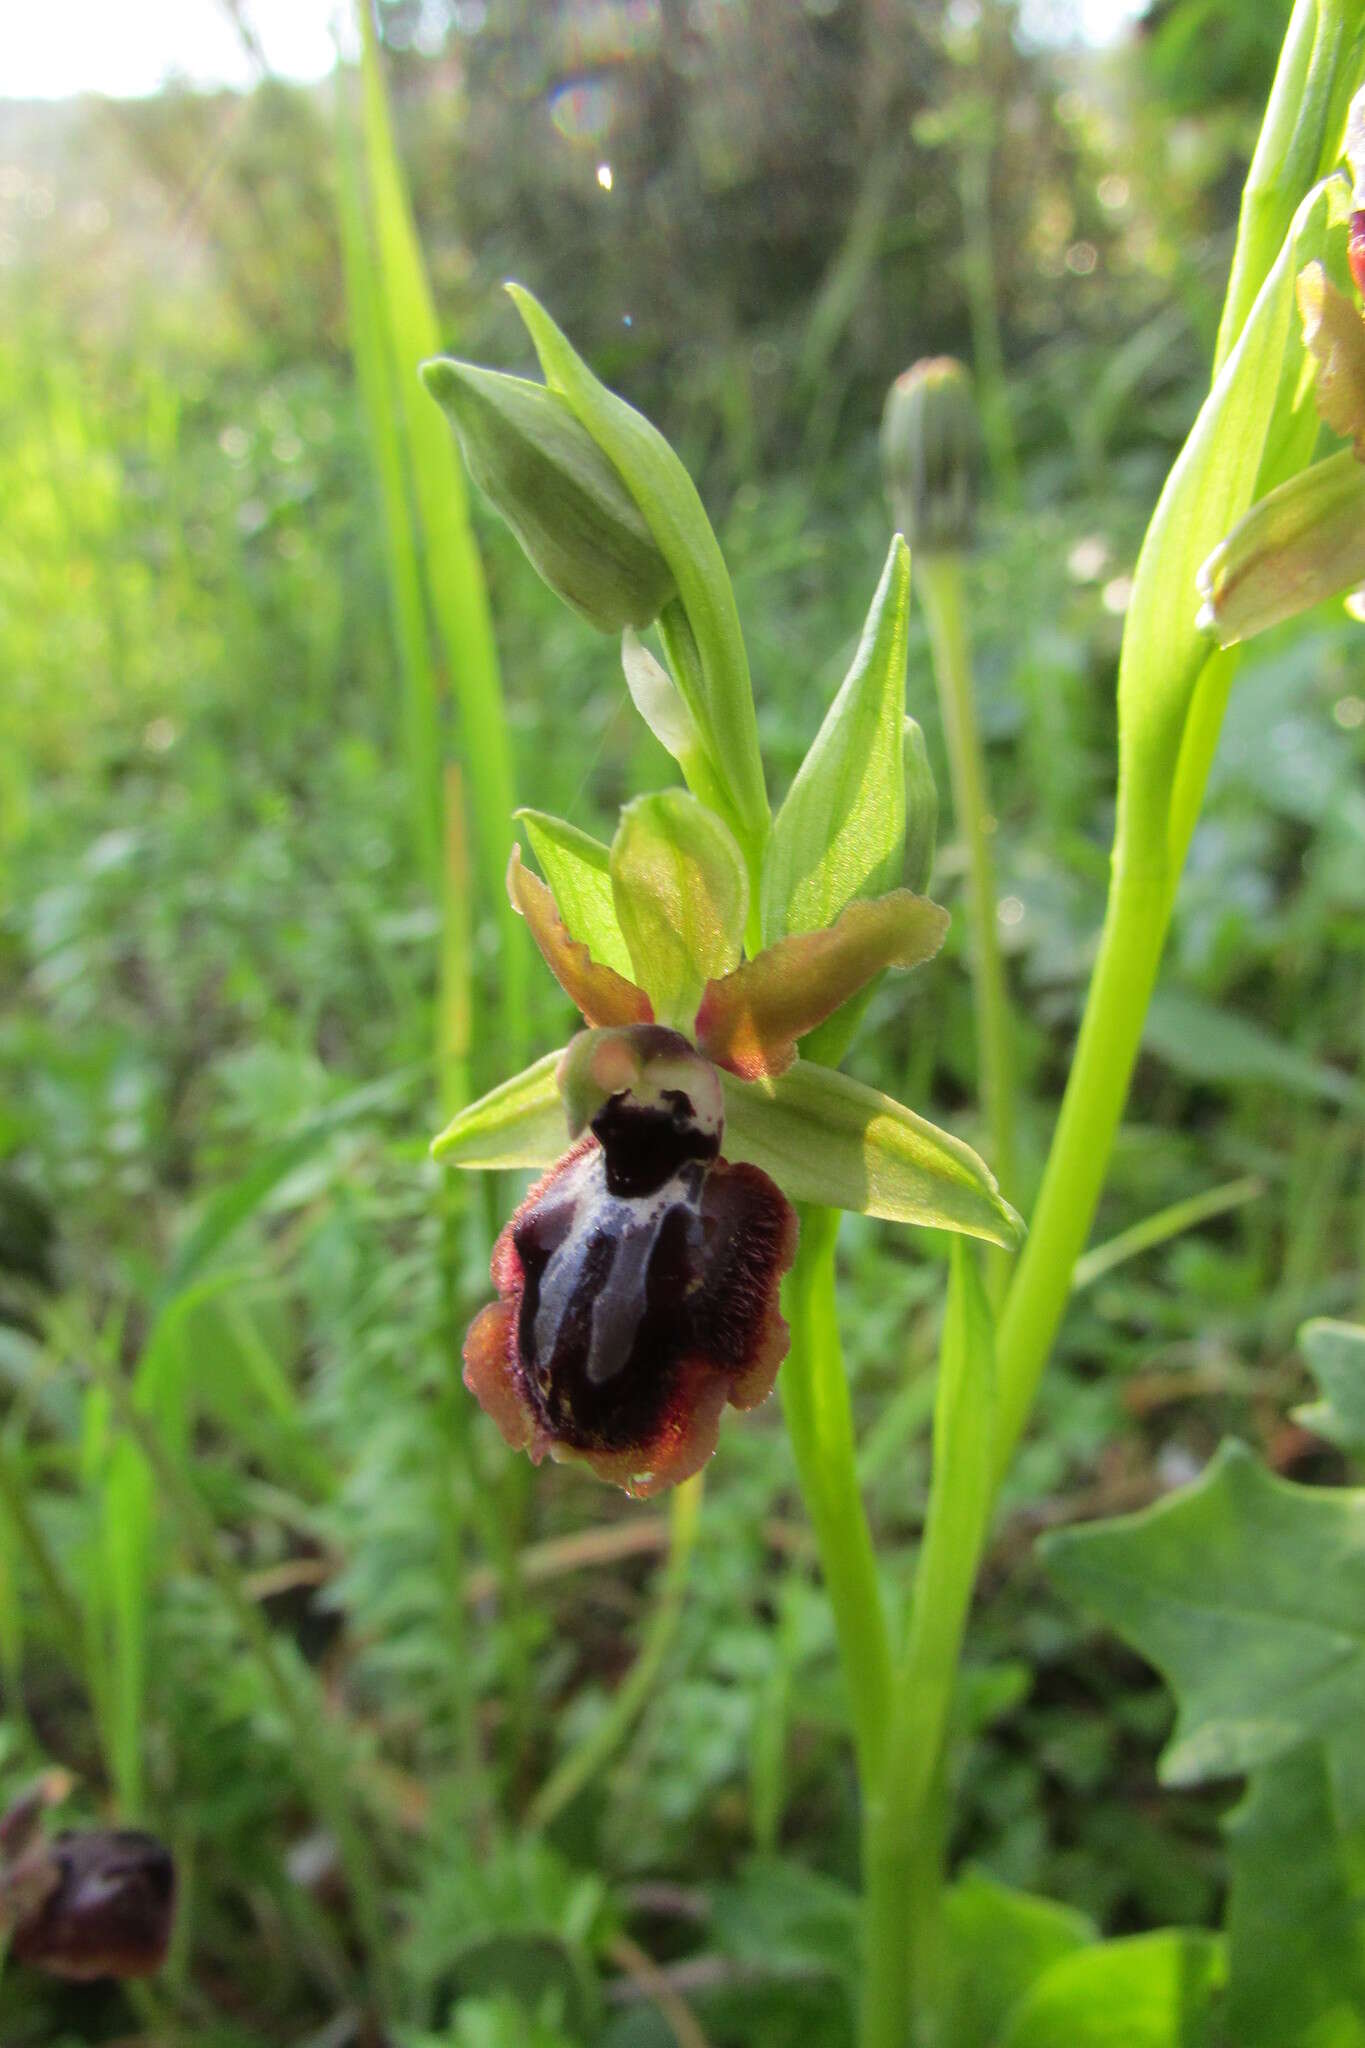 Image of Ophrys sphegodes subsp. passionis (Sennen) Sanz & Nuet